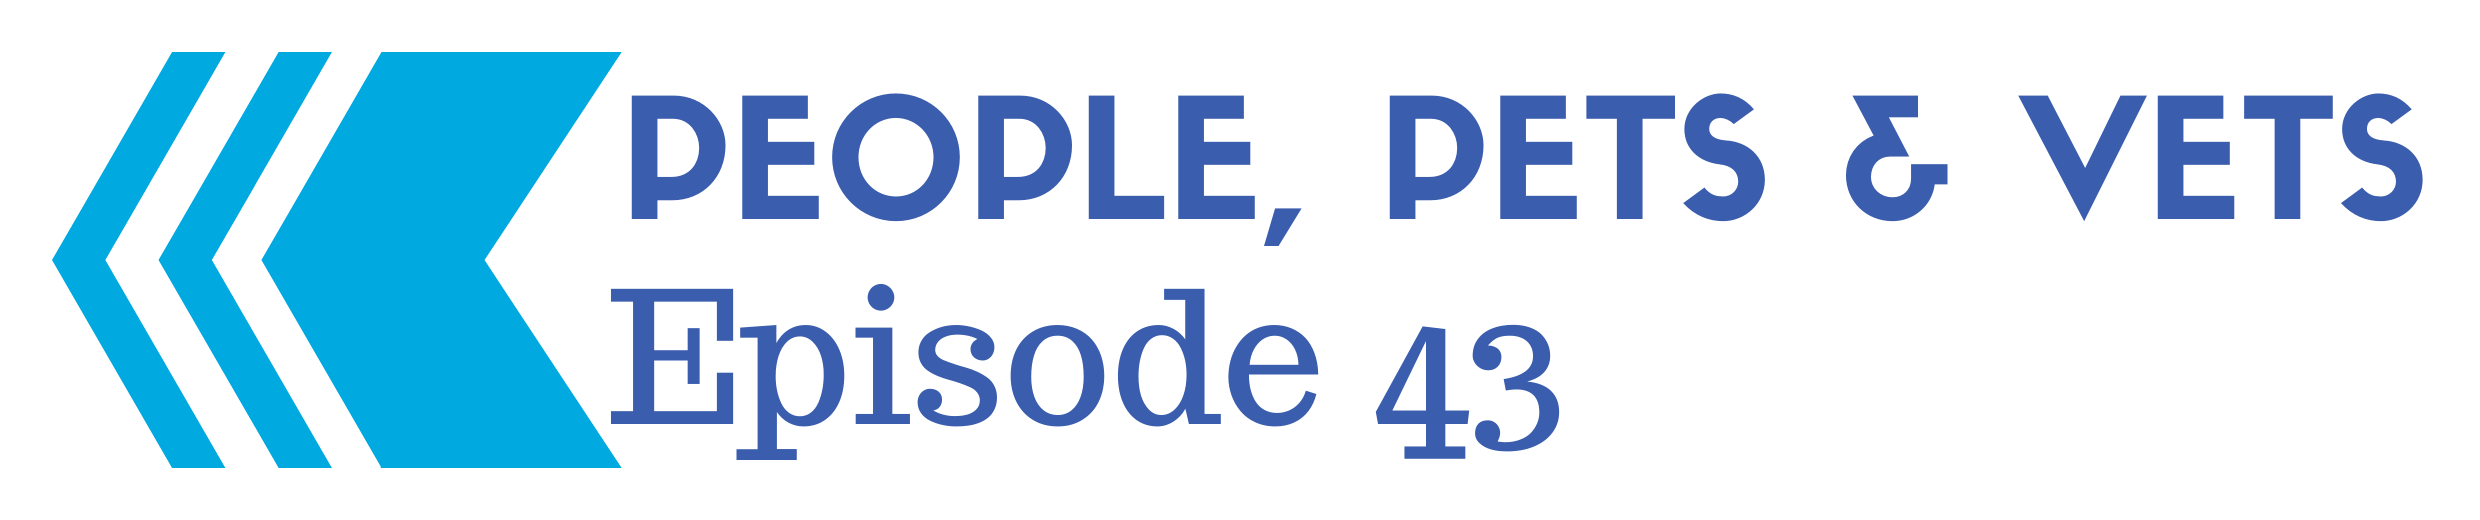 Back to Episode 43